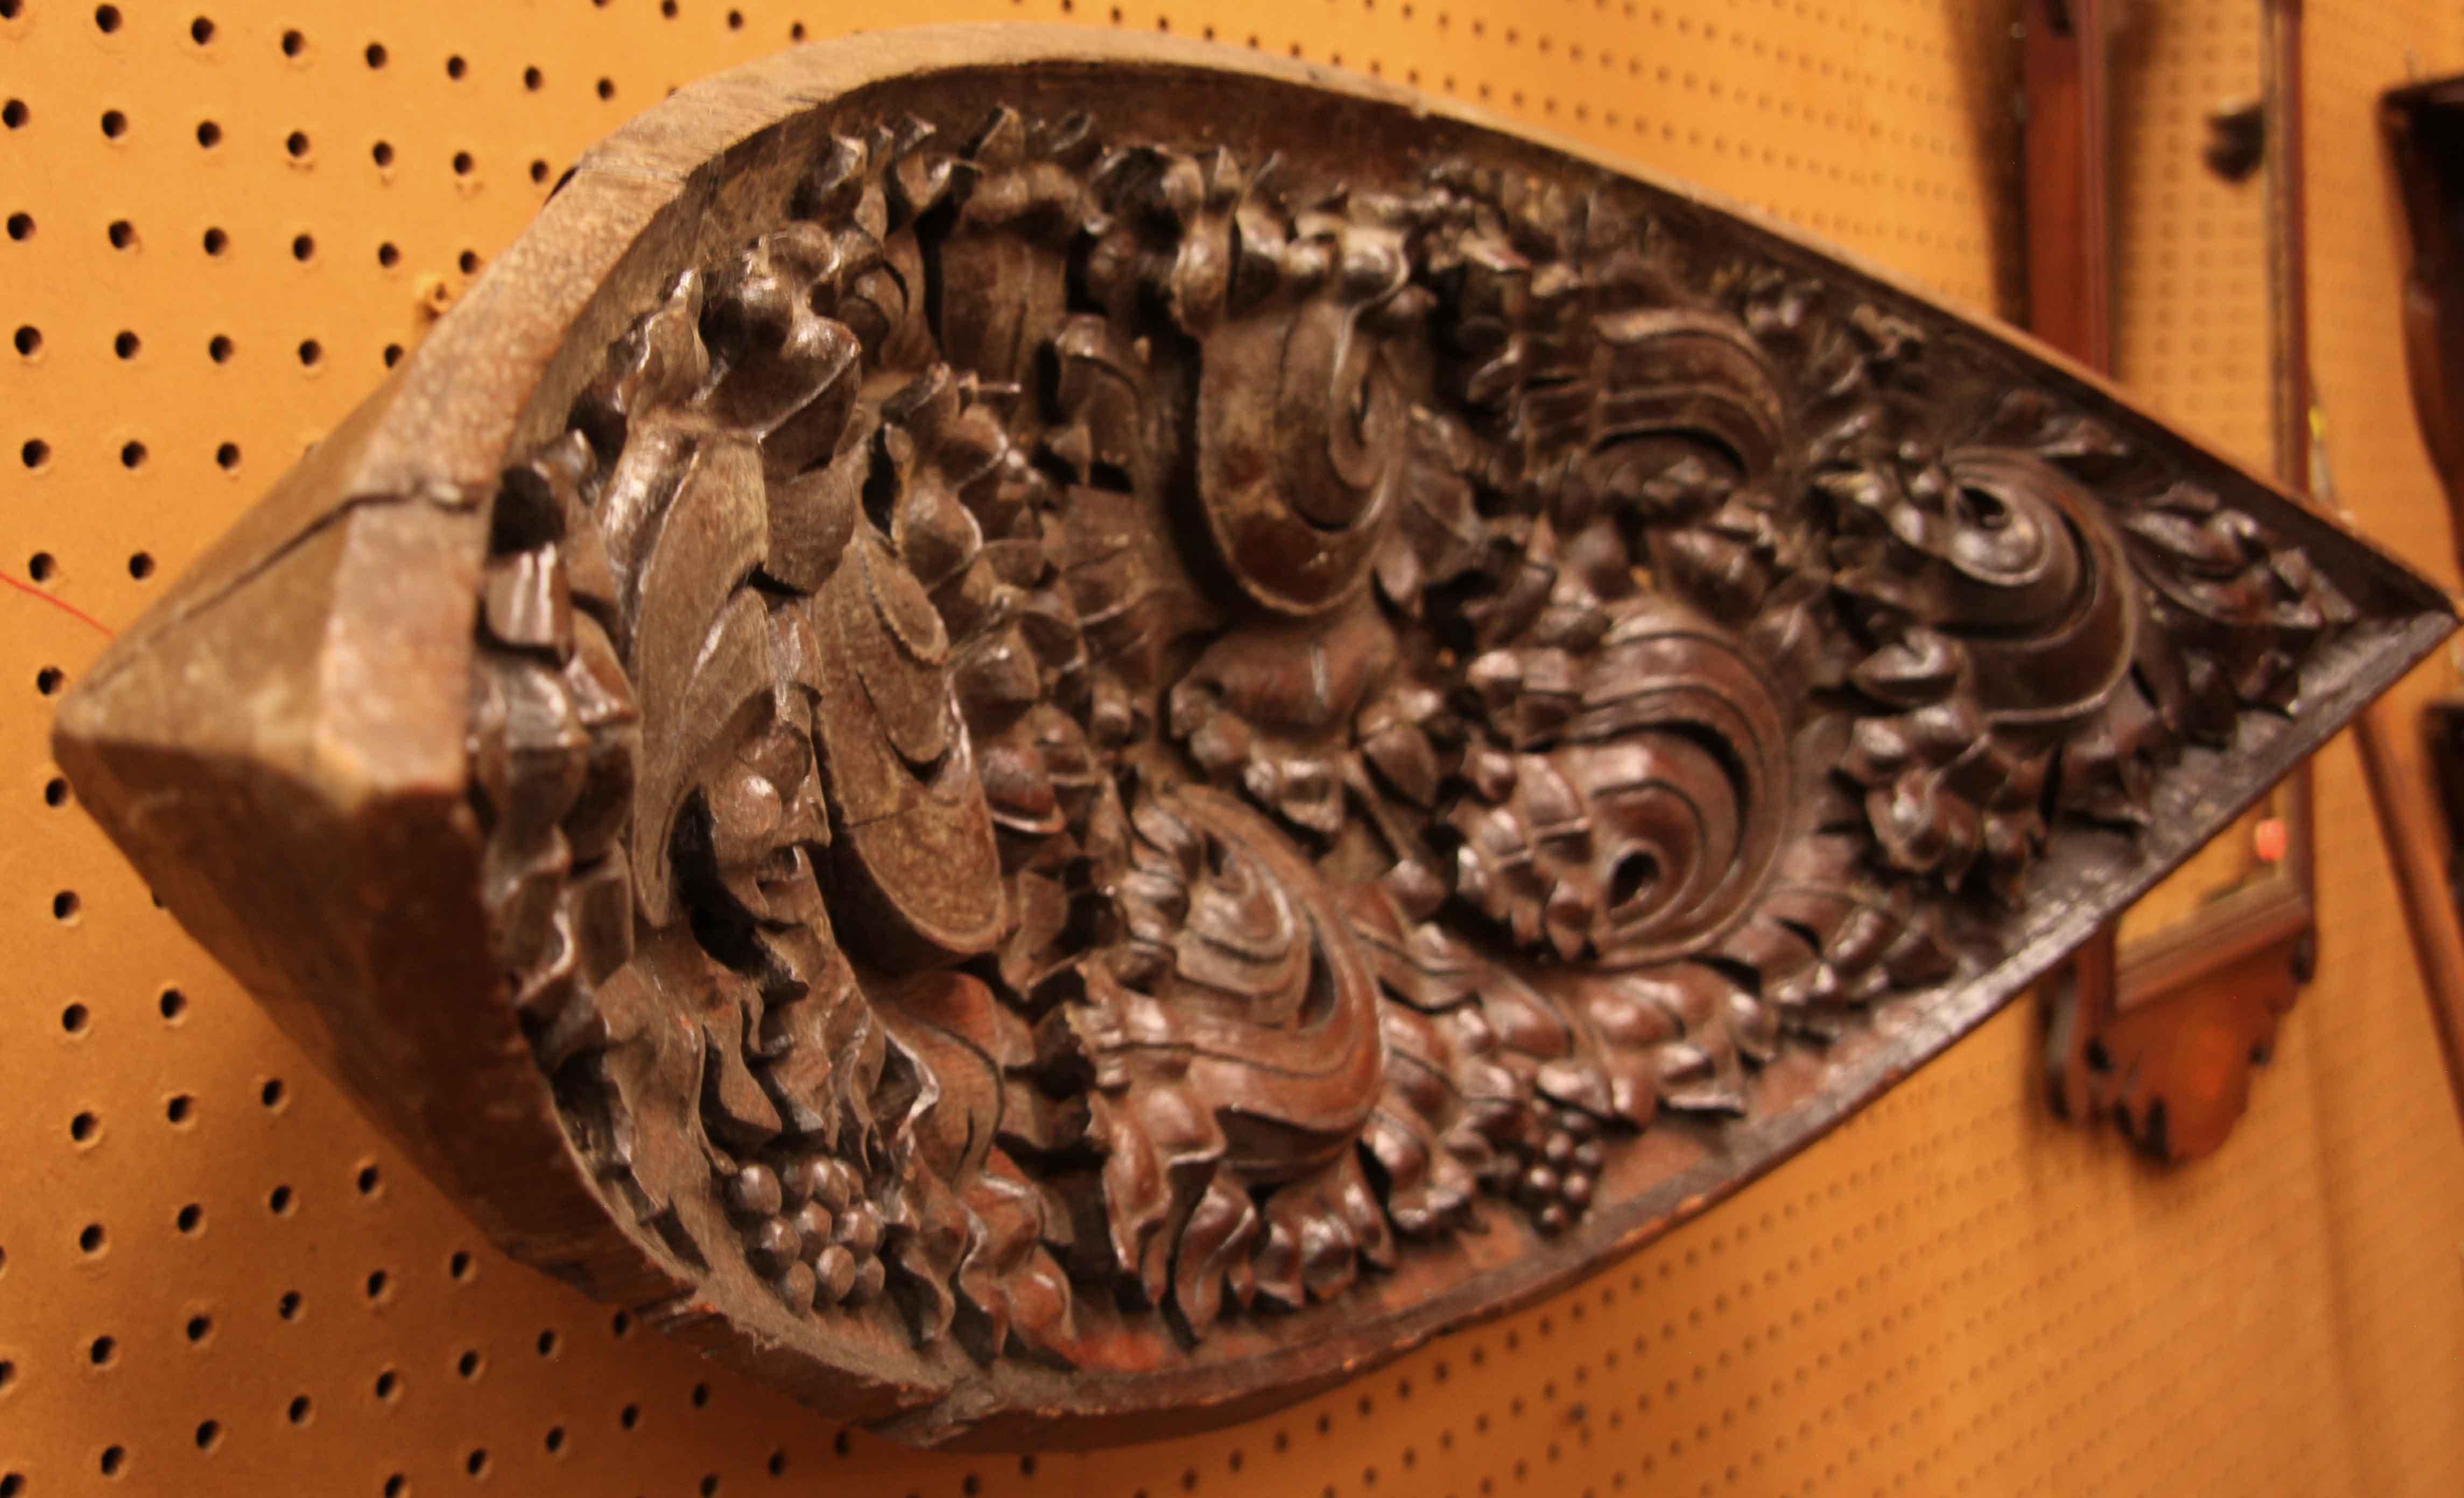 Concave shaped carving,  this unique piece can rest flat on a surface or hang ( it has 2 original attached rings on the back for hanging) .  The whimsical carving defies conventional descriptive terms, there does appear to be foliate and grapes in